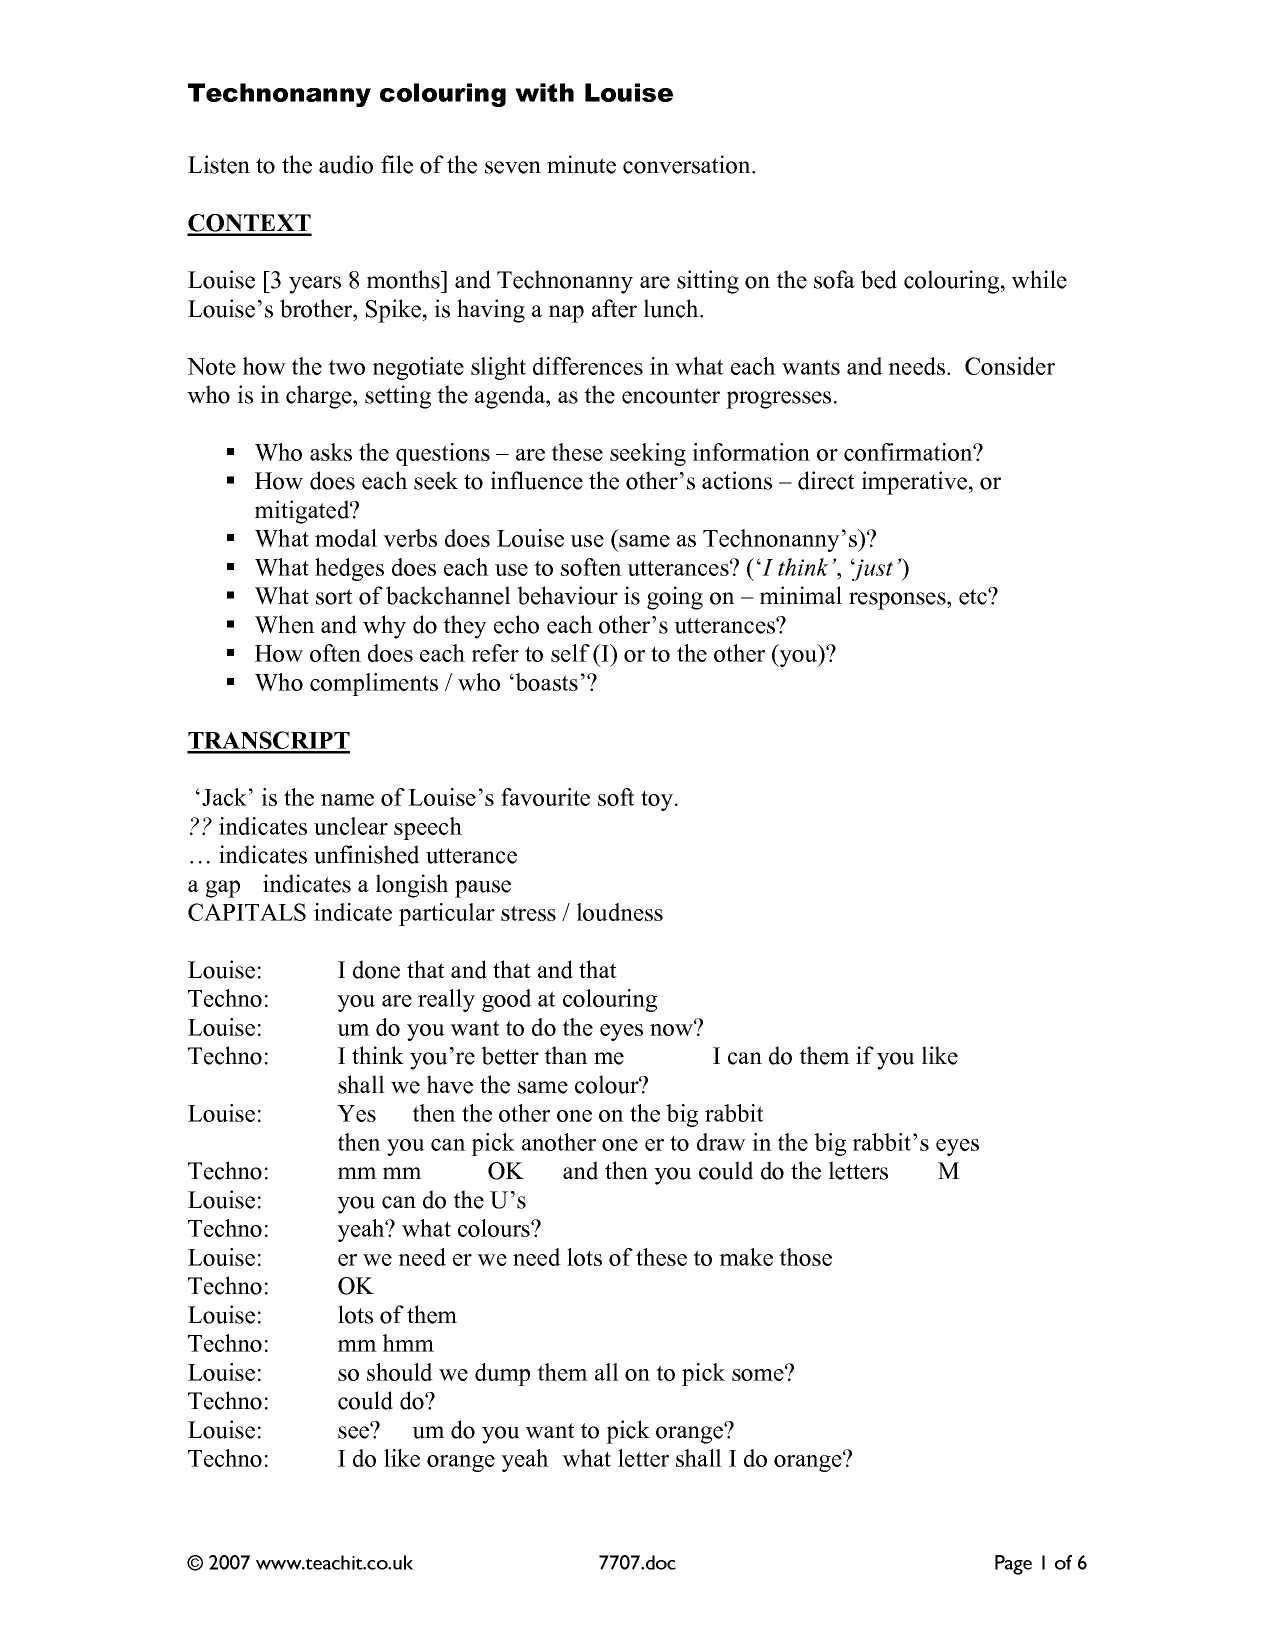 Magna Carta Worksheet with Roger Mcgough U A Fanthorpe Search Results Teachit English